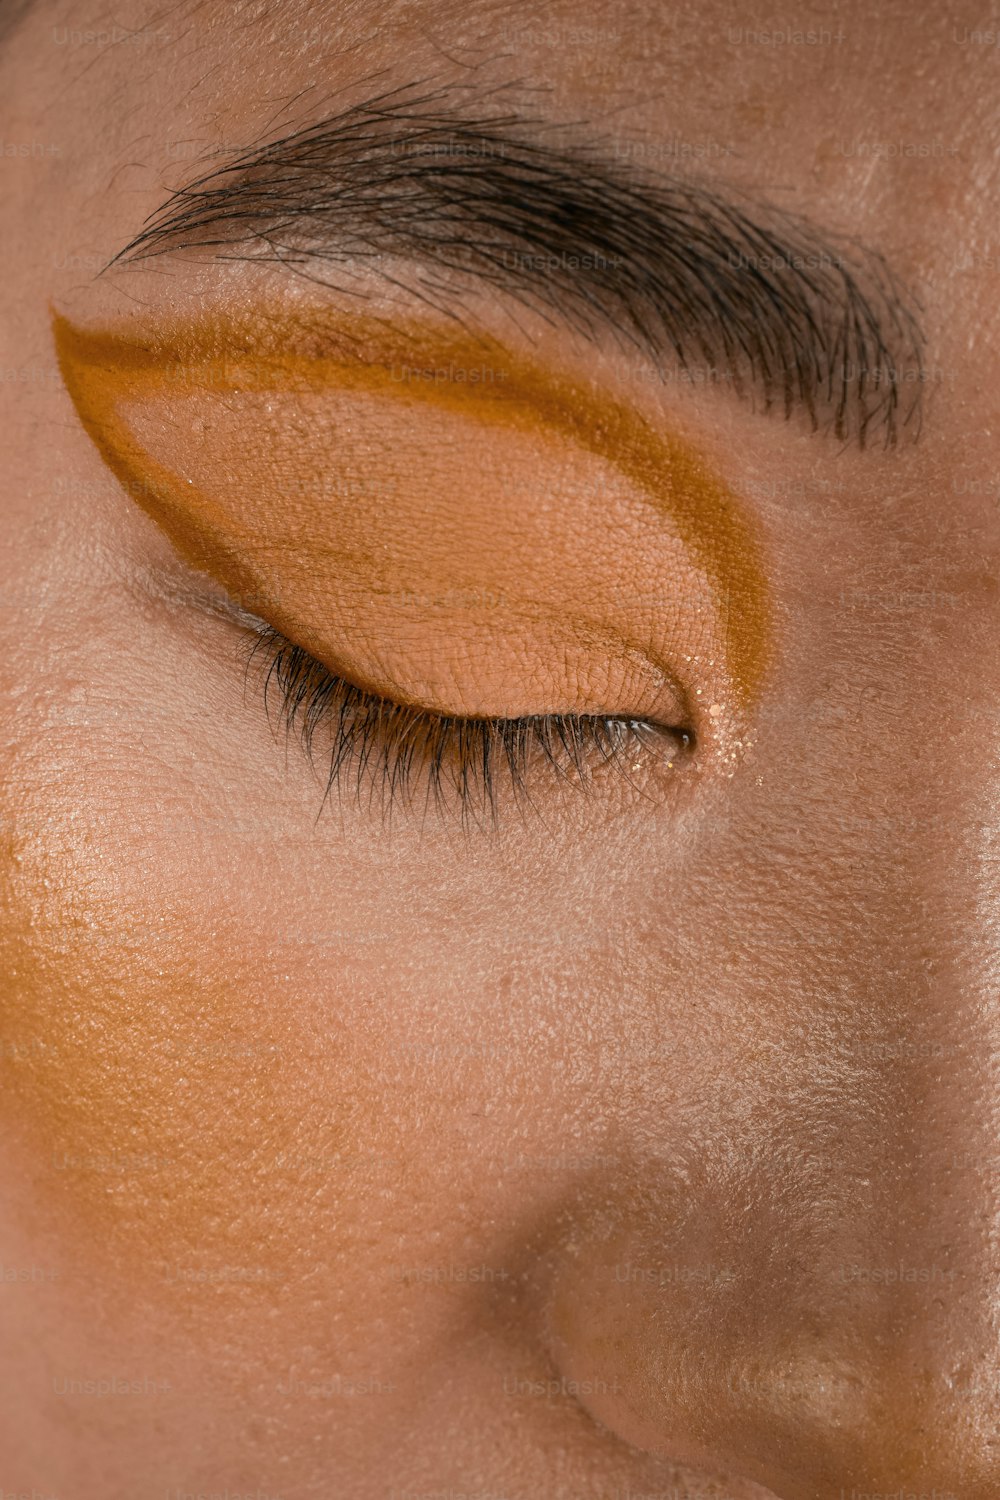 a close up of a woman's face with a yellow eye shadow